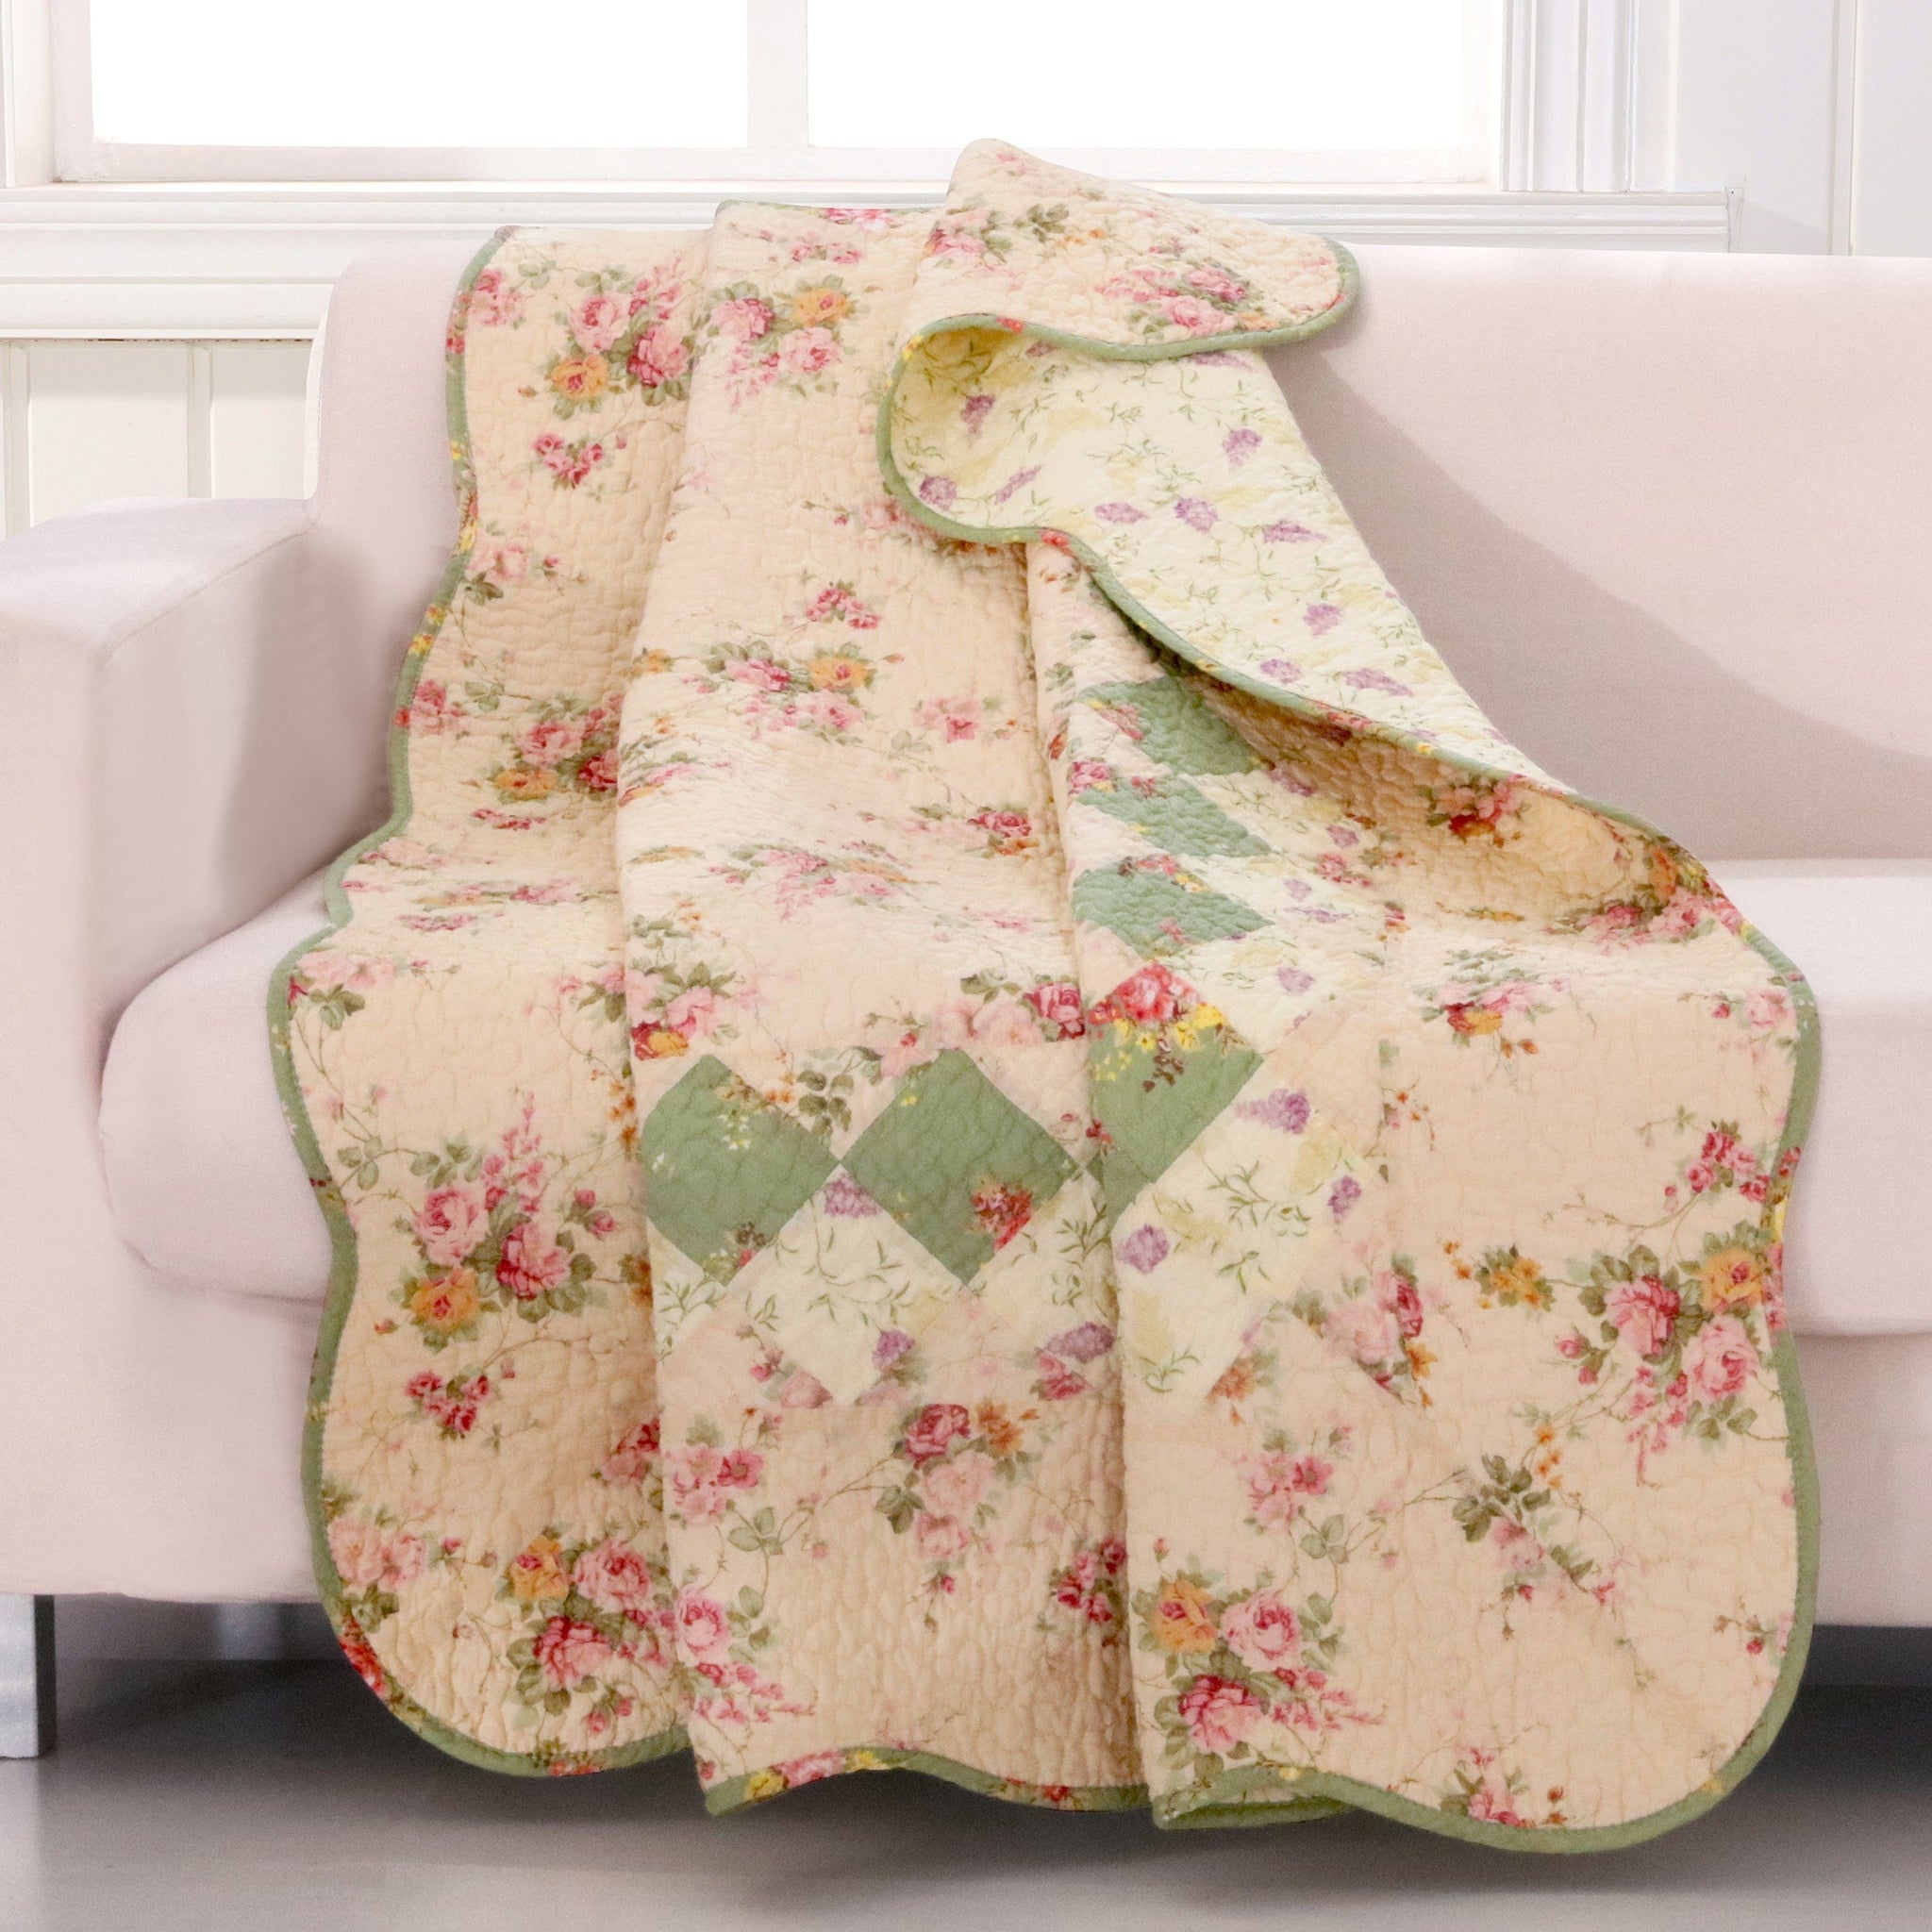 Vintage Inspired Bedding- Quilts, Duvet Covers, Comforters - Retro Barn  Country Linens